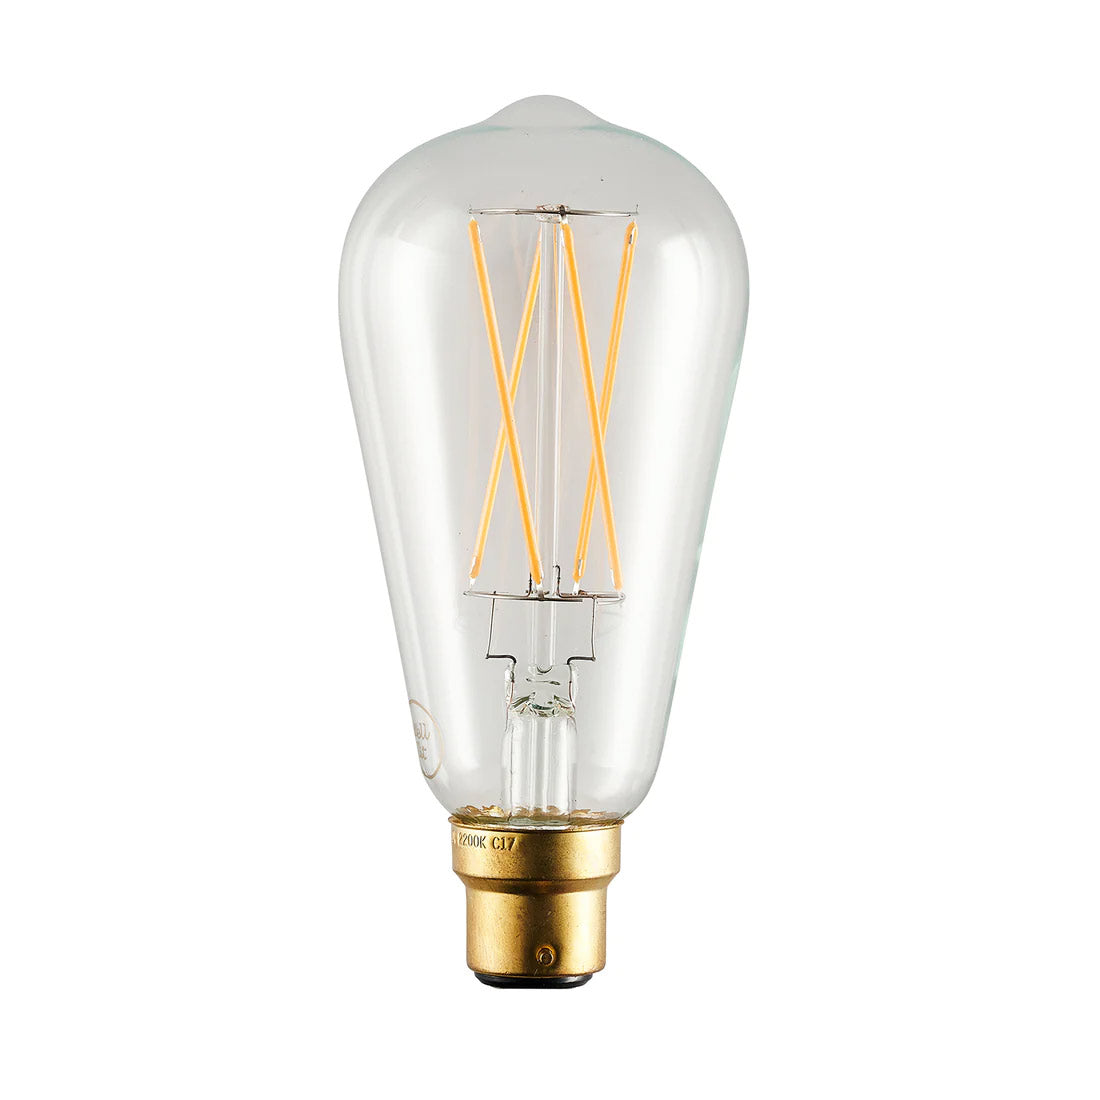 The Leo ST64 LED Light Bulb with a B22 Bayonet Cap fitting sold by South Charlotte Fine lighting